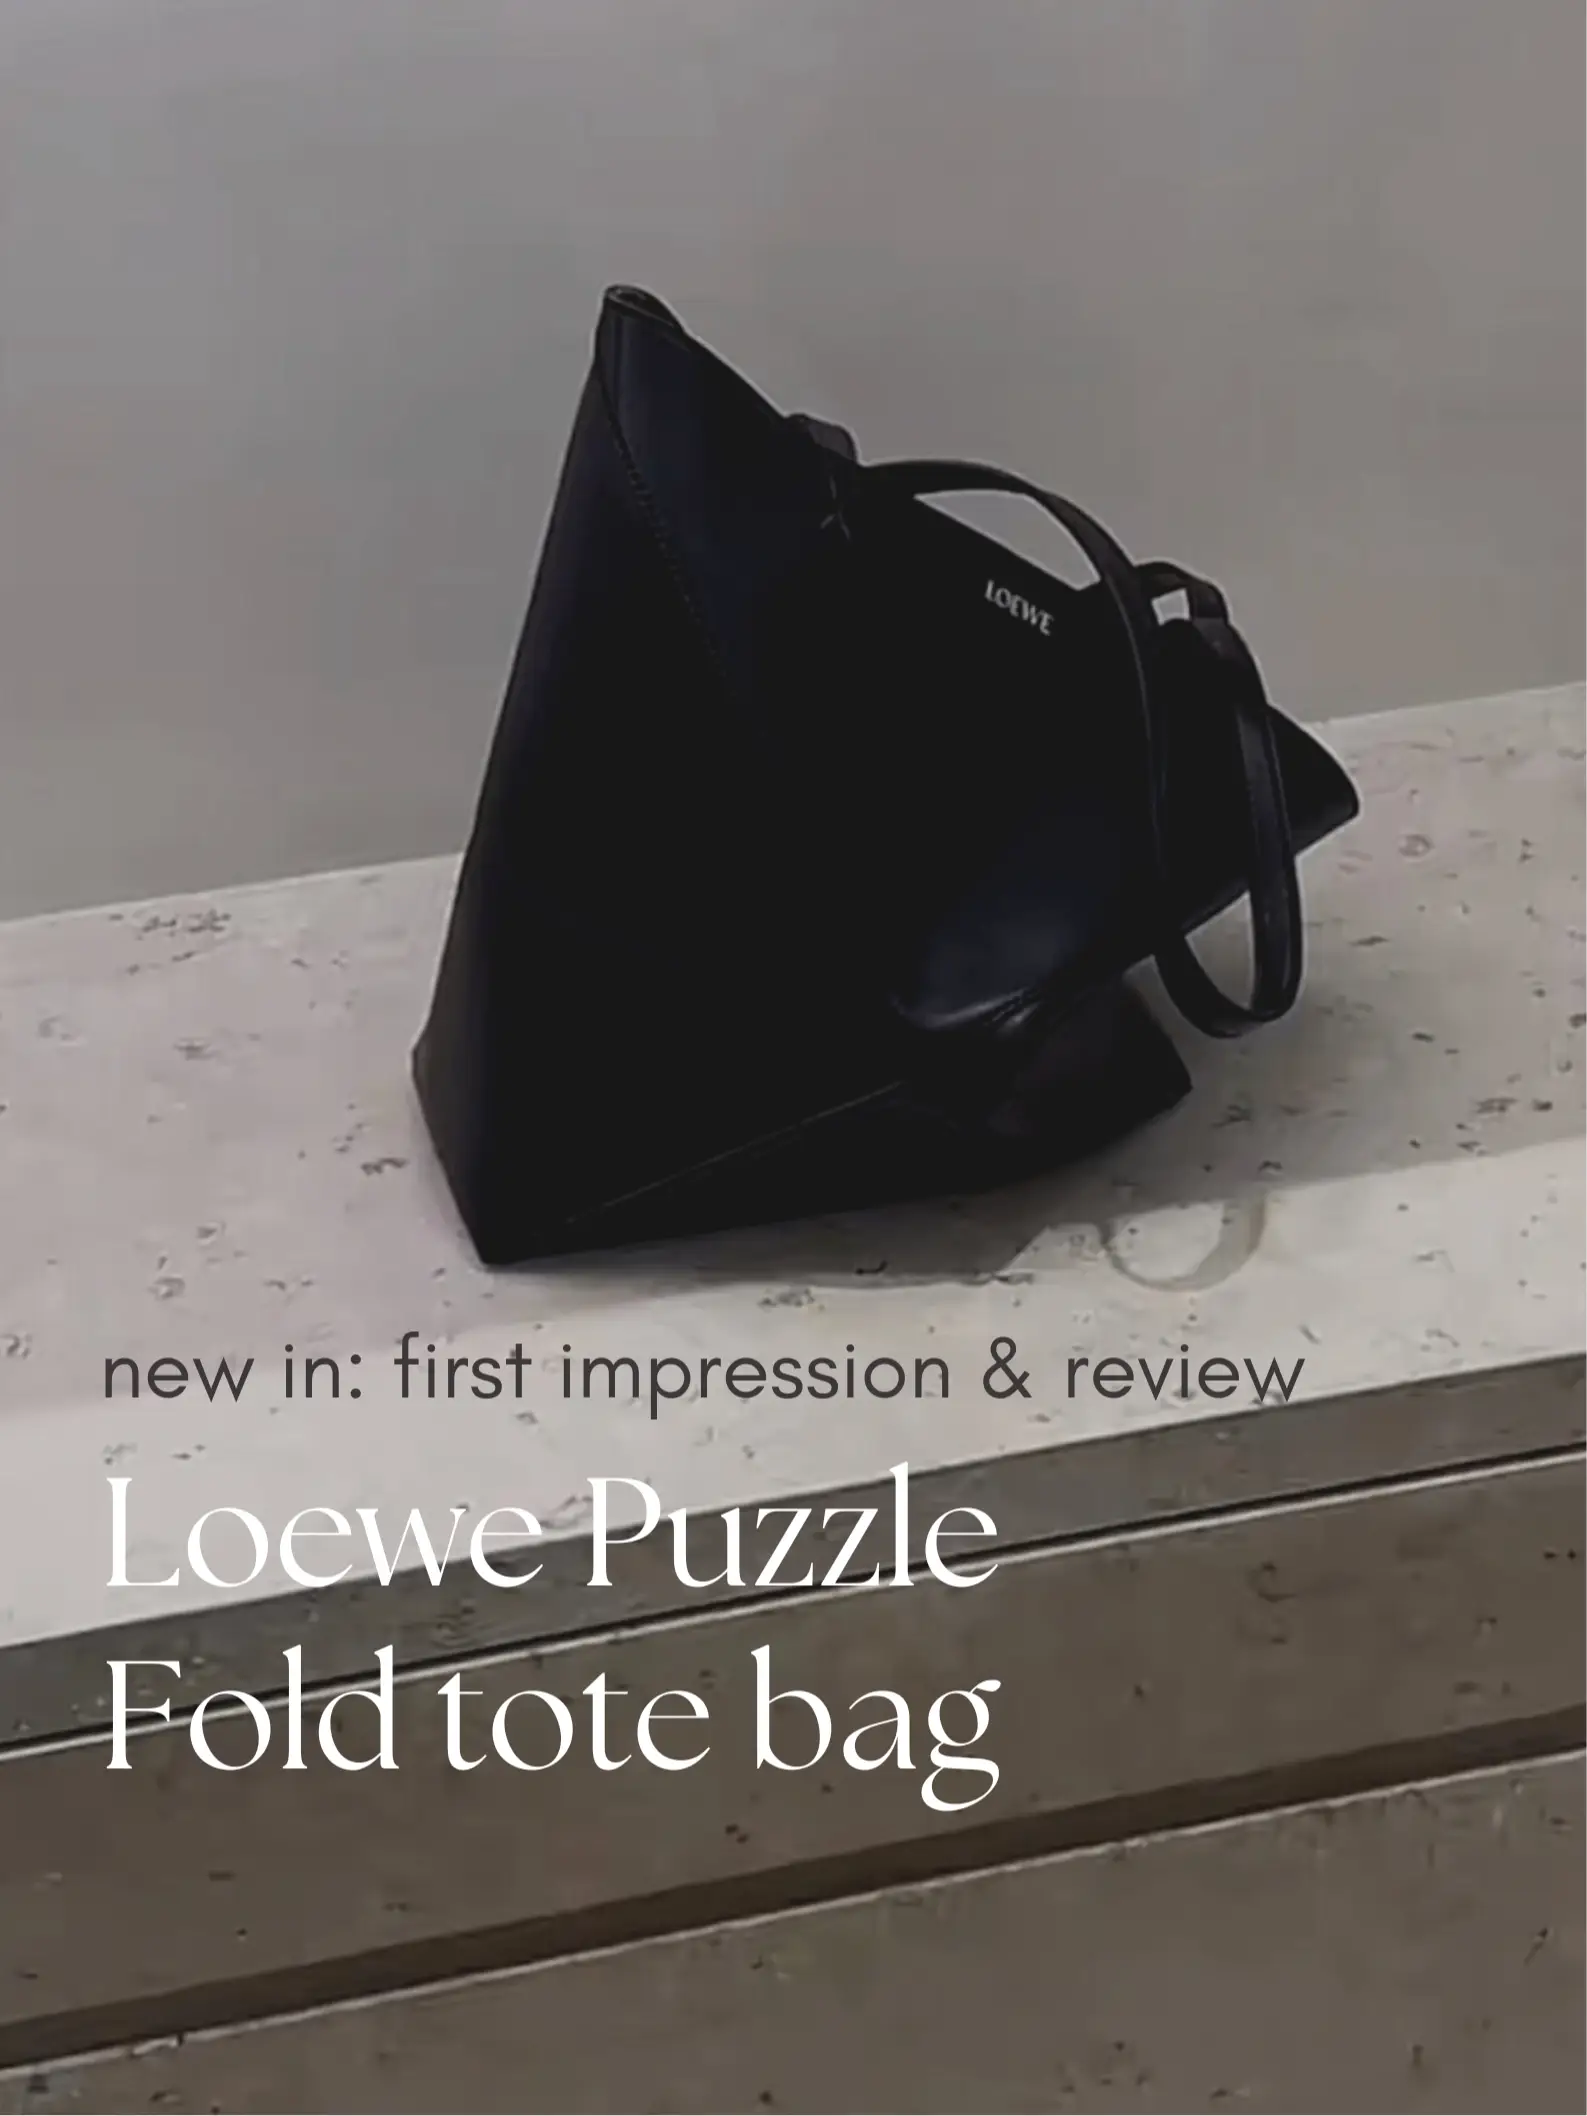 Try On With Me : NEW LV FOLD TOTE! ~ LV Bag Review! ~ Buy This Bag